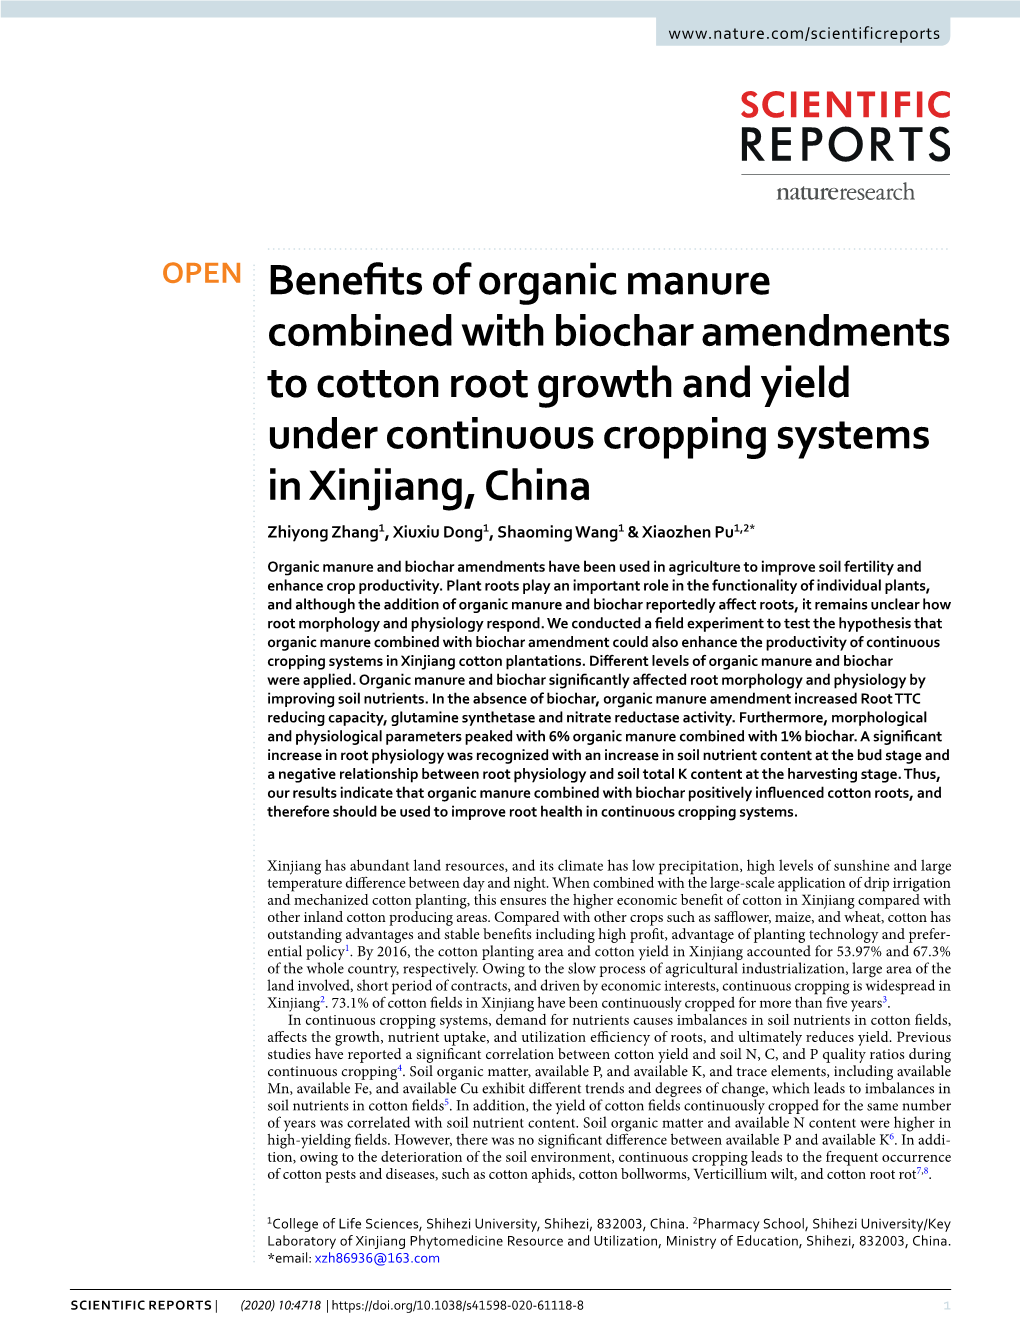 Benefits of Organic Manure Combined with Biochar Amendments to Cotton